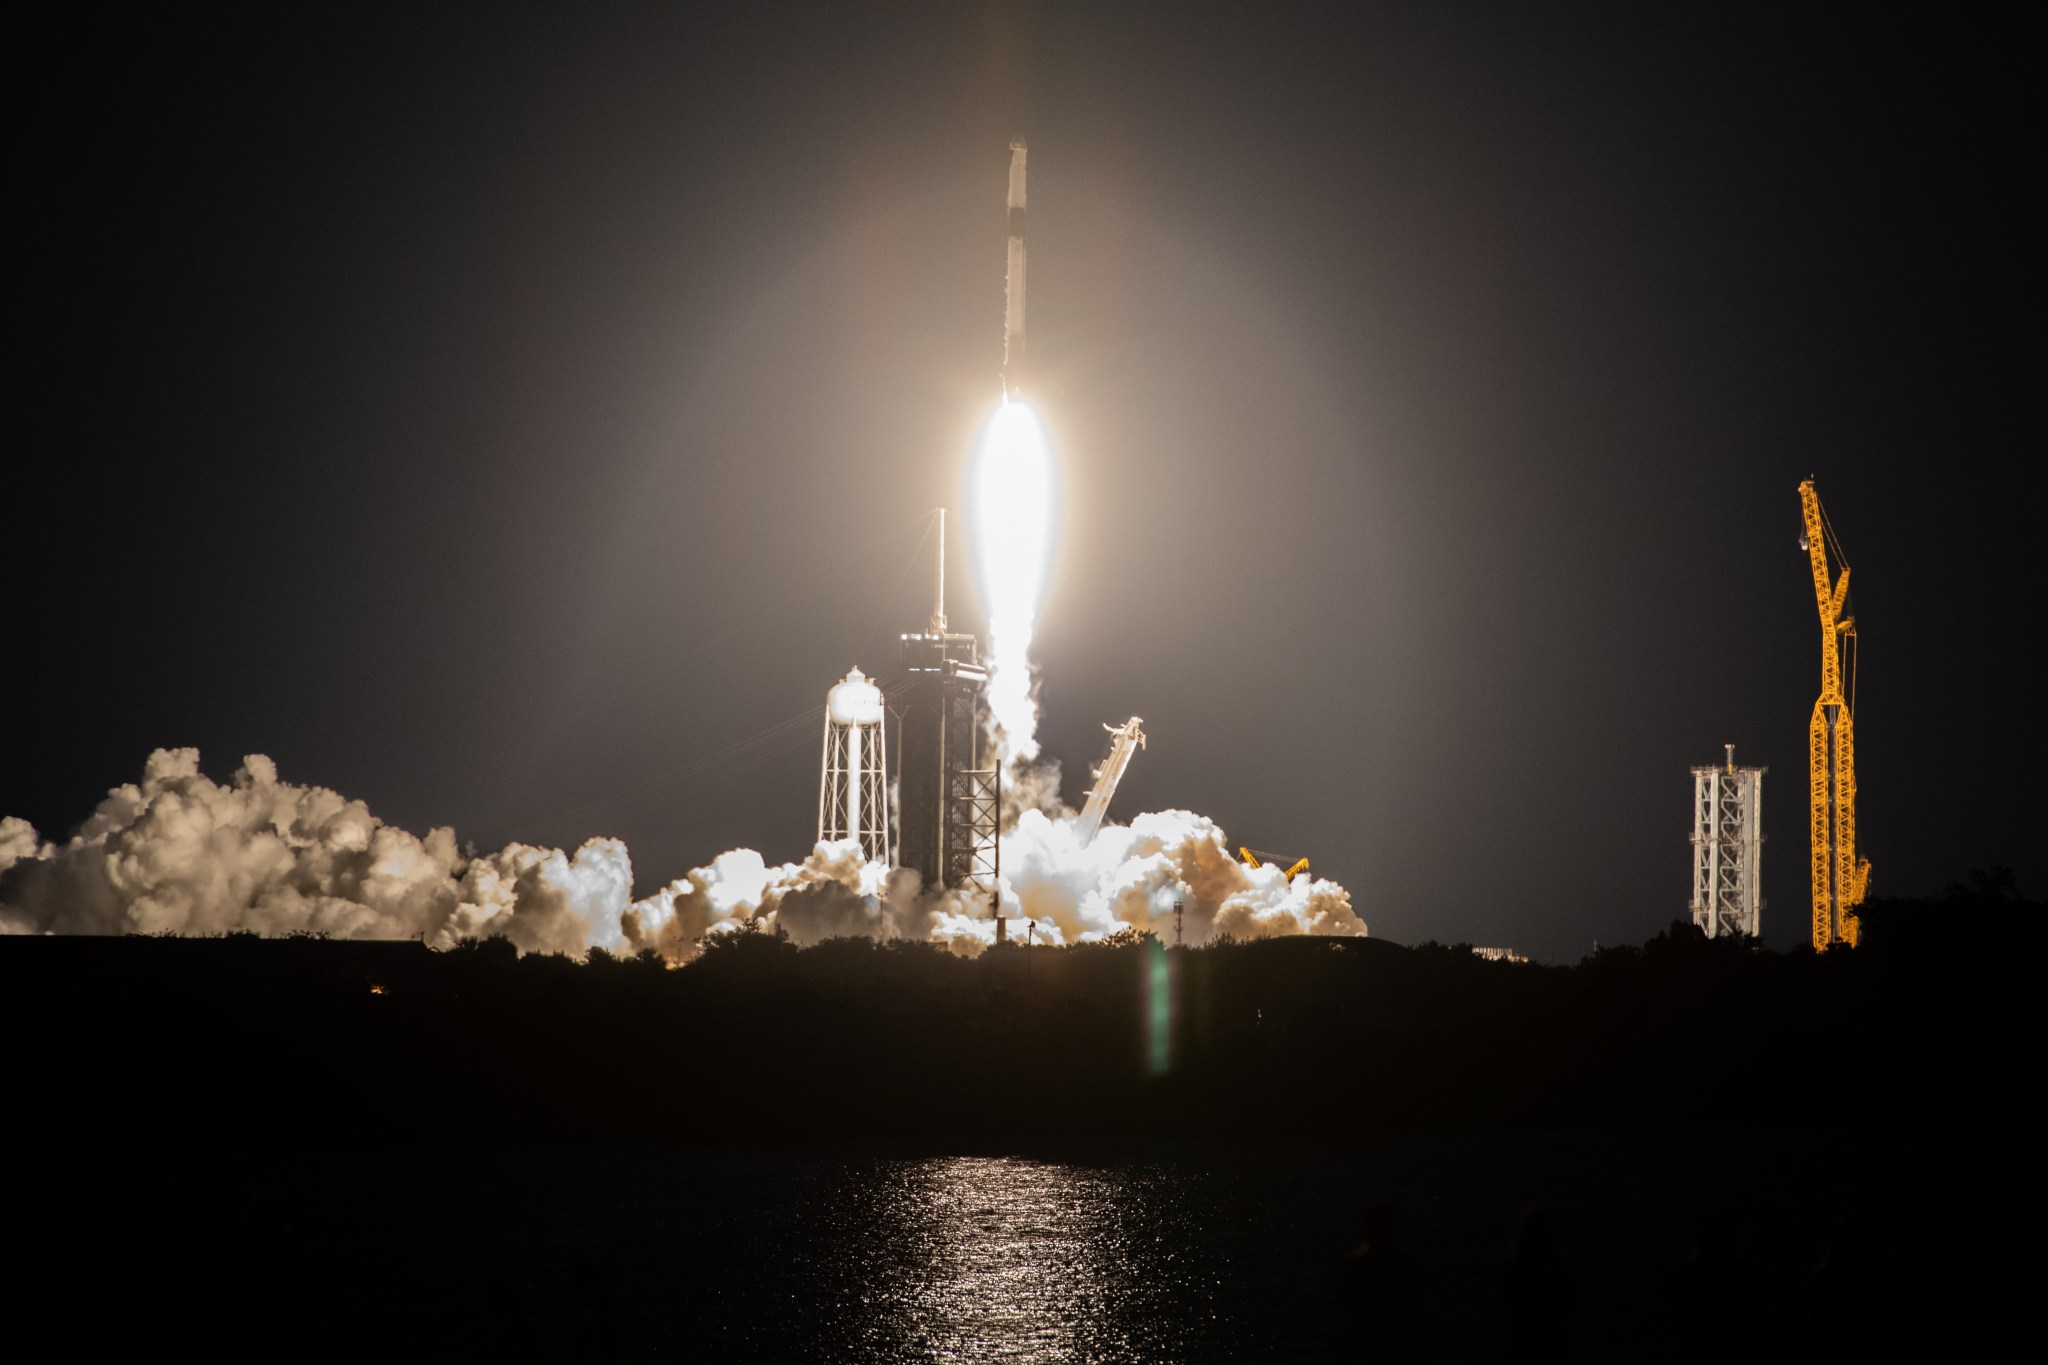 A SpaceX Falcon 9 rocket and Dragon spacecraft lifts off at night from the launchpad at NASA's Kennedy Space Center in Florida. 